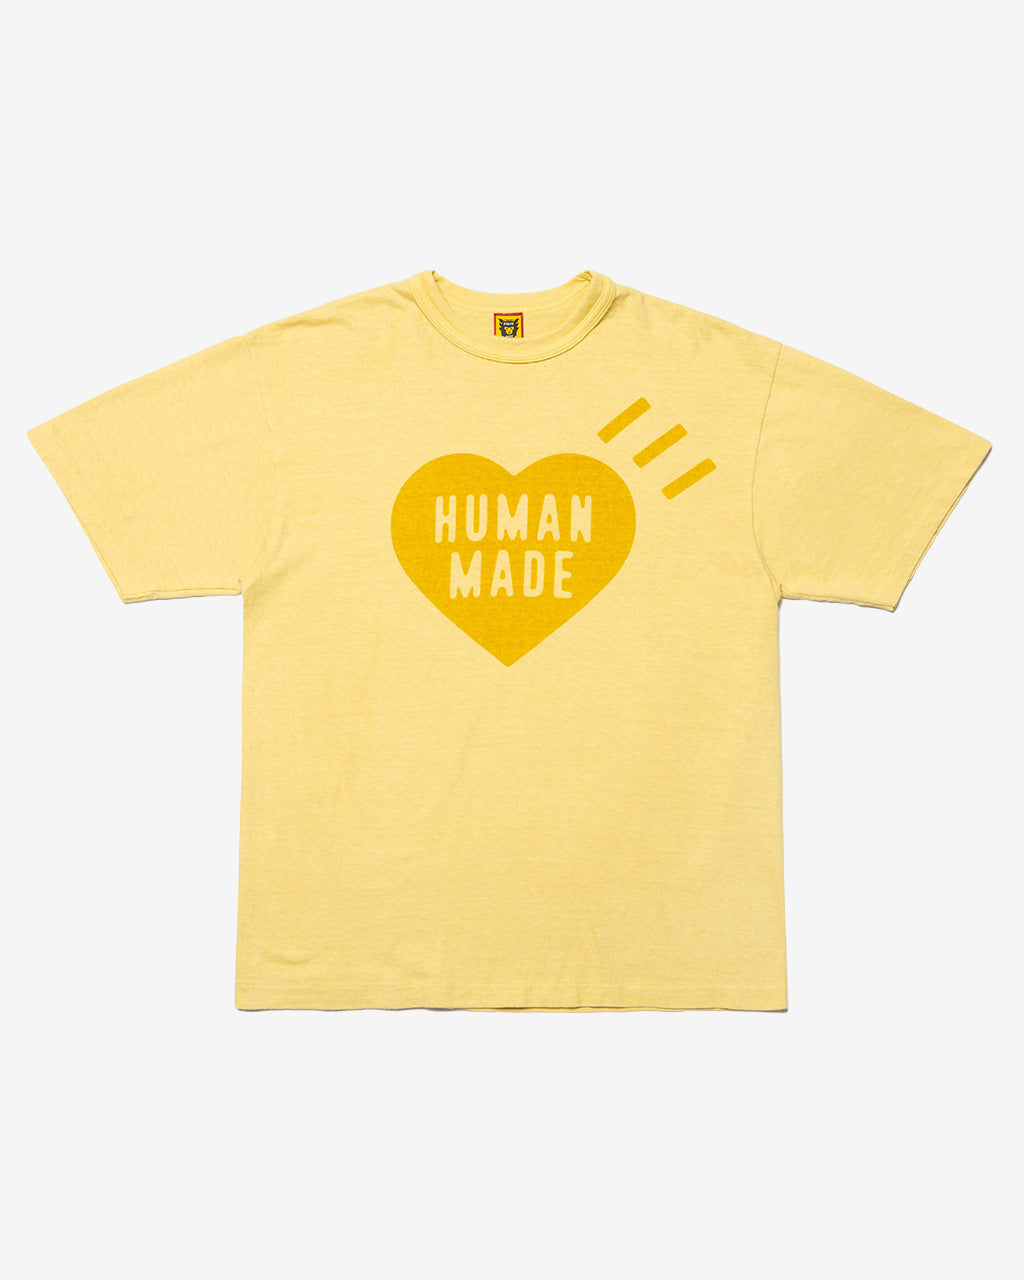 Plant Dyed T-Shirt #2 Yellow